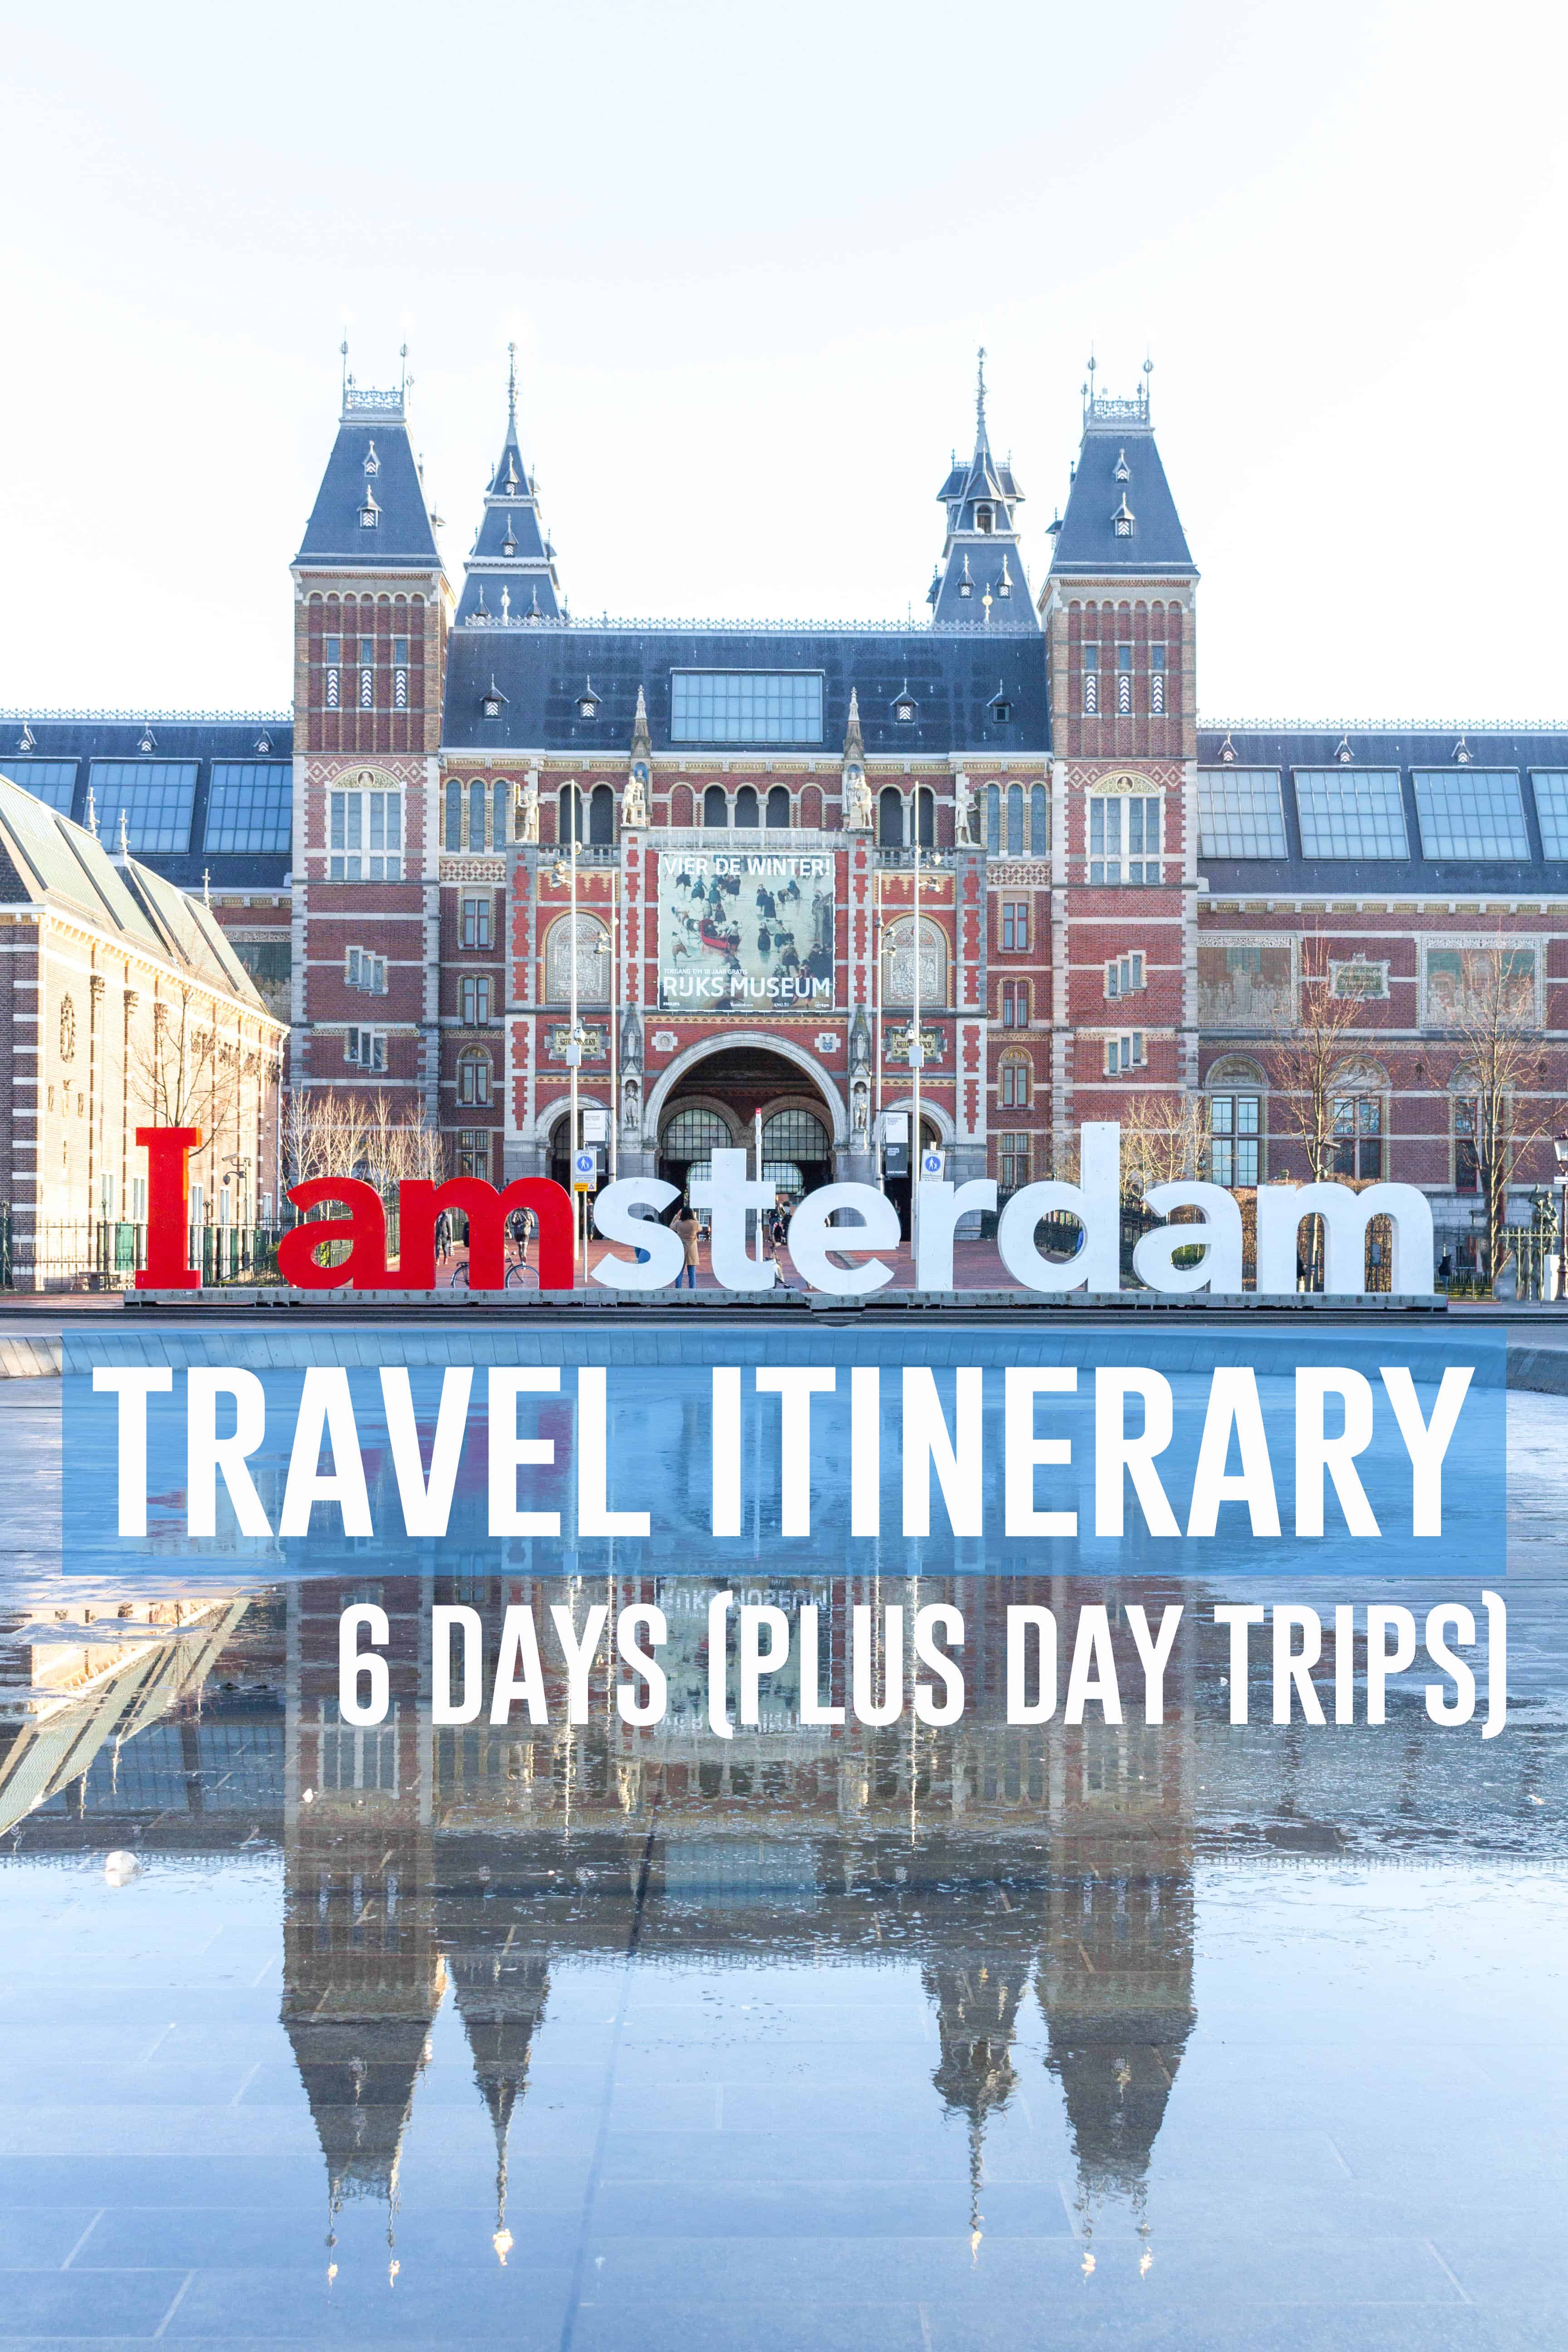 How my friend and I spent 6 days in Amsterdam! A travel itinerary. #Amsterdam #TheNetherlands #AmsterdamTravelItinerary #HollandTravel #Travel #TravelItinerary